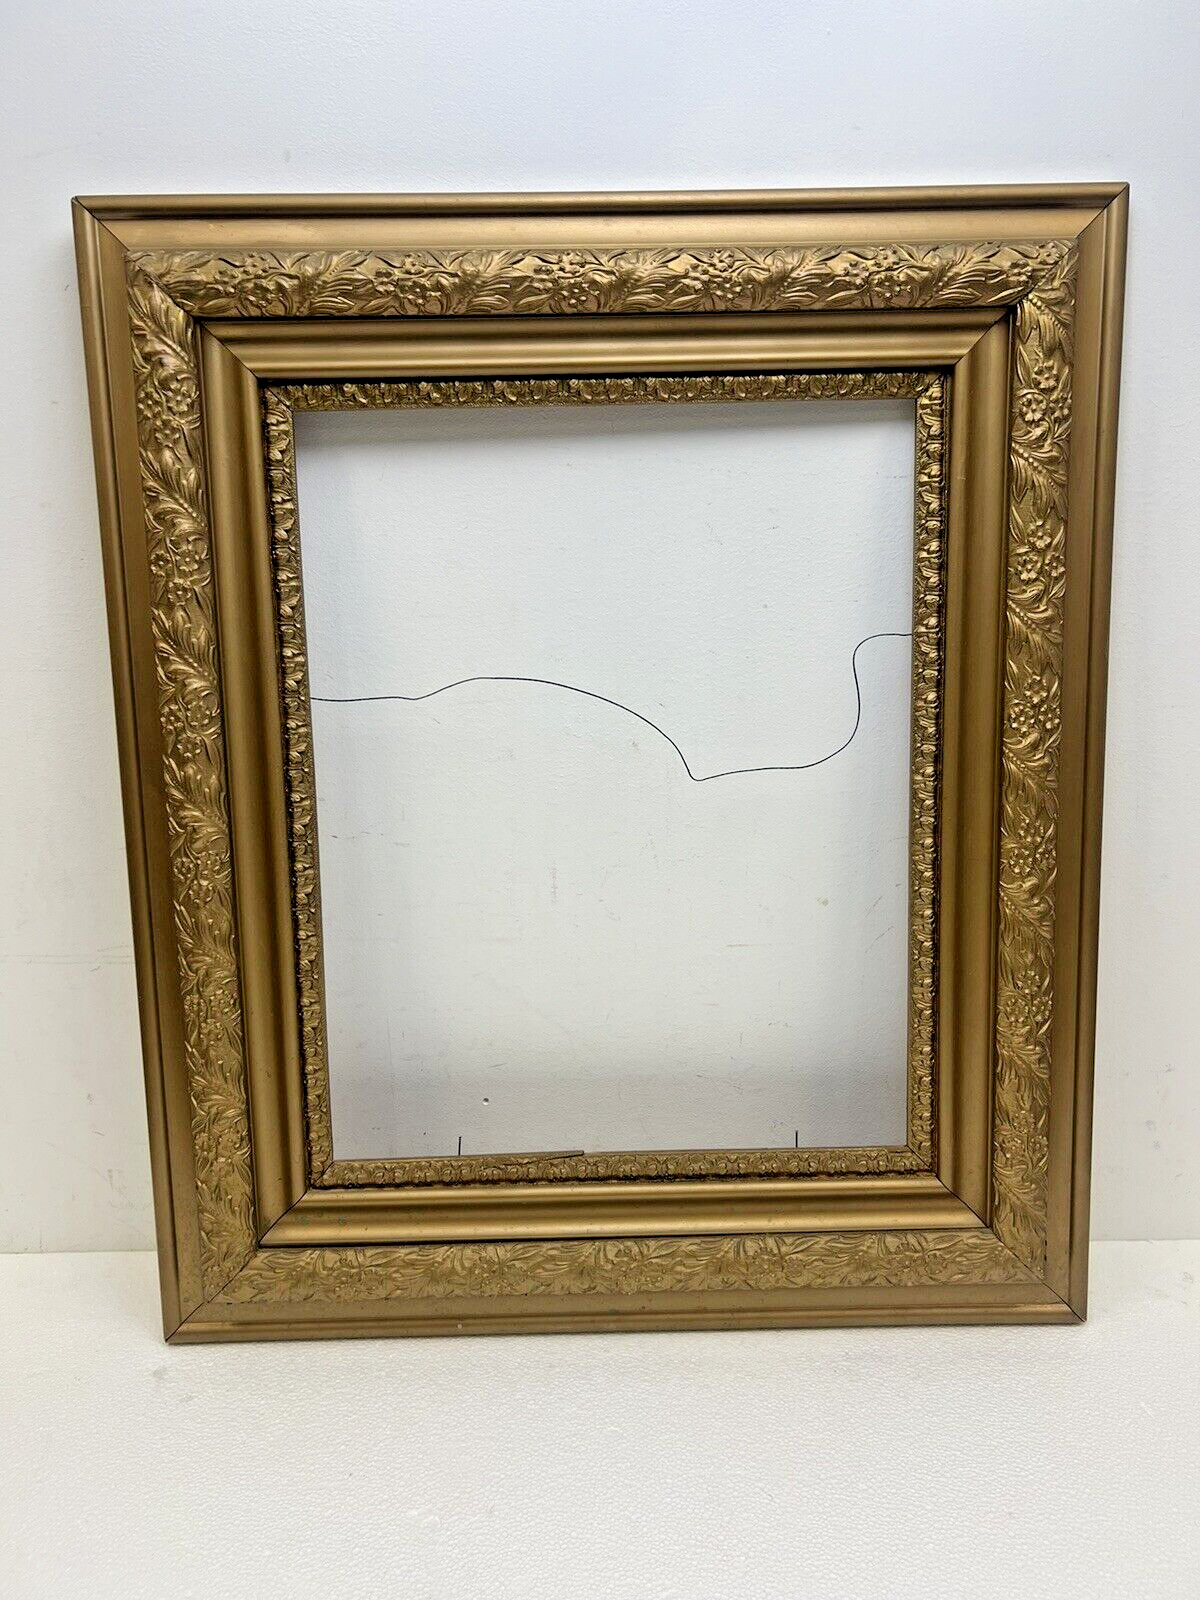 Antique Picture Frame gold wood vintage ornate gesso FITS 16 x 20 LARGE layered